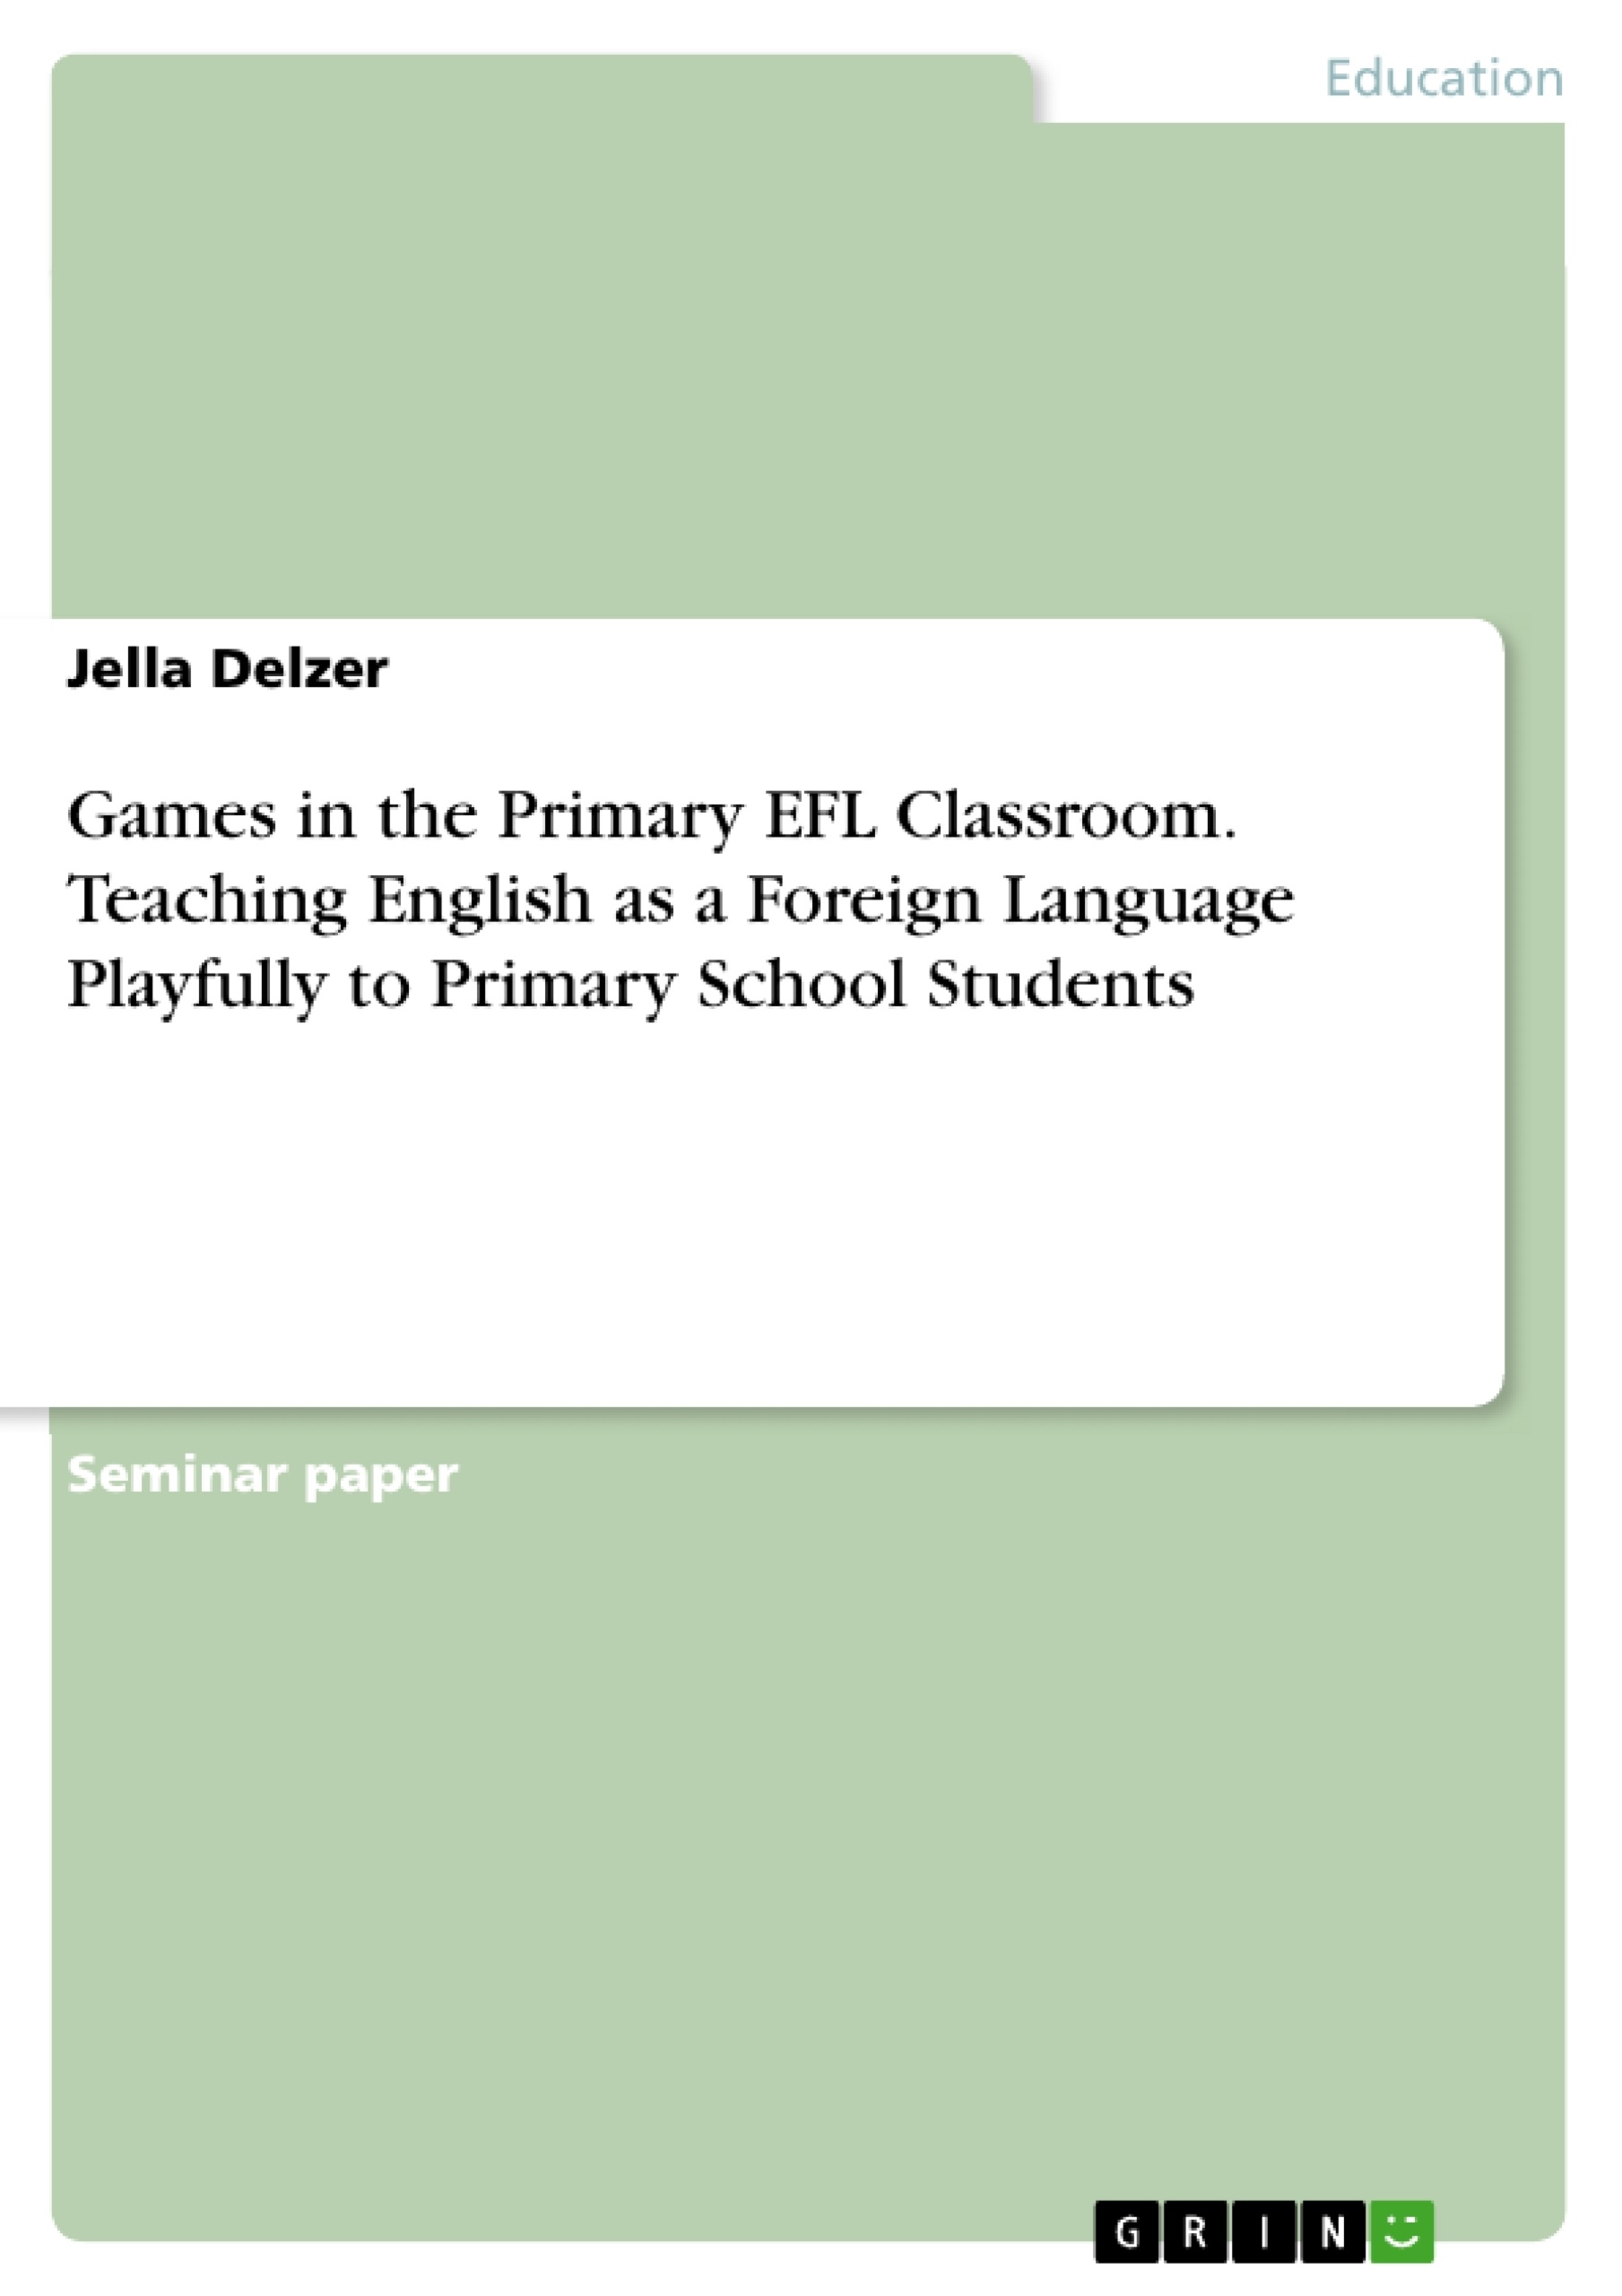 Title: Games in the Primary EFL Classroom. Teaching English as a Foreign Language Playfully to Primary School Students